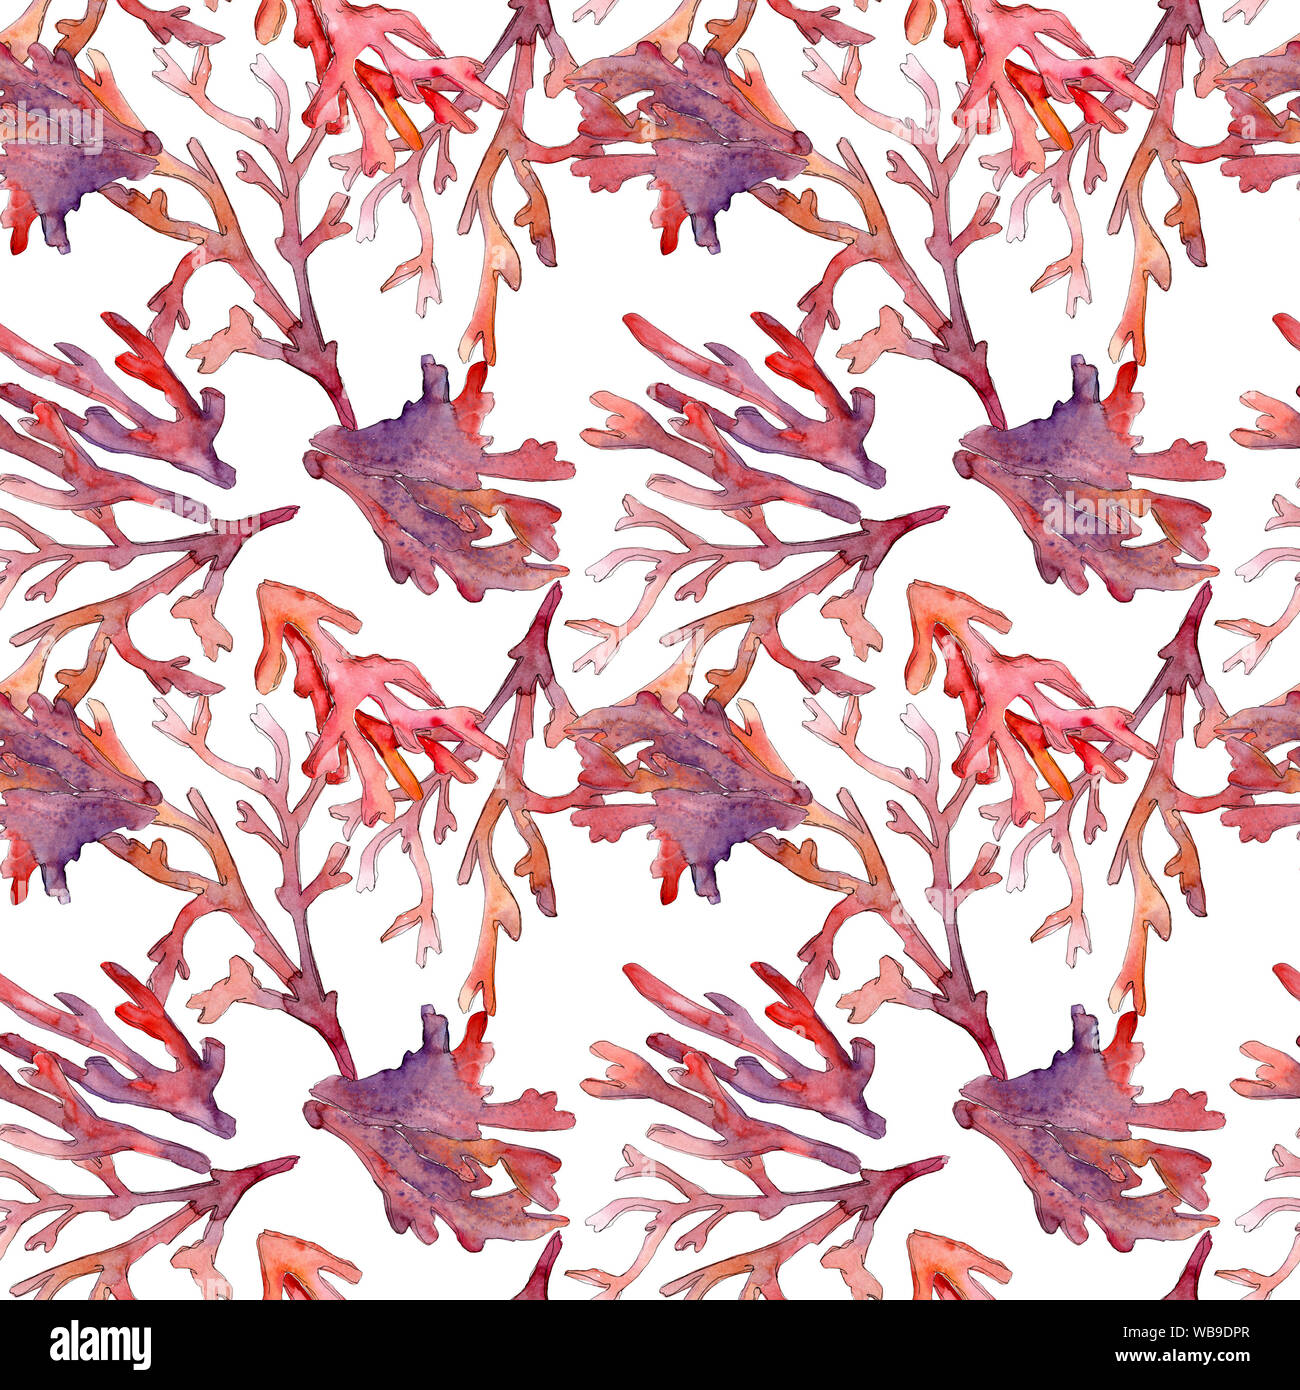 Red aquatic underwater nature coral reef. Watercolor background illustration set. Seamless background pattern. Stock Photo